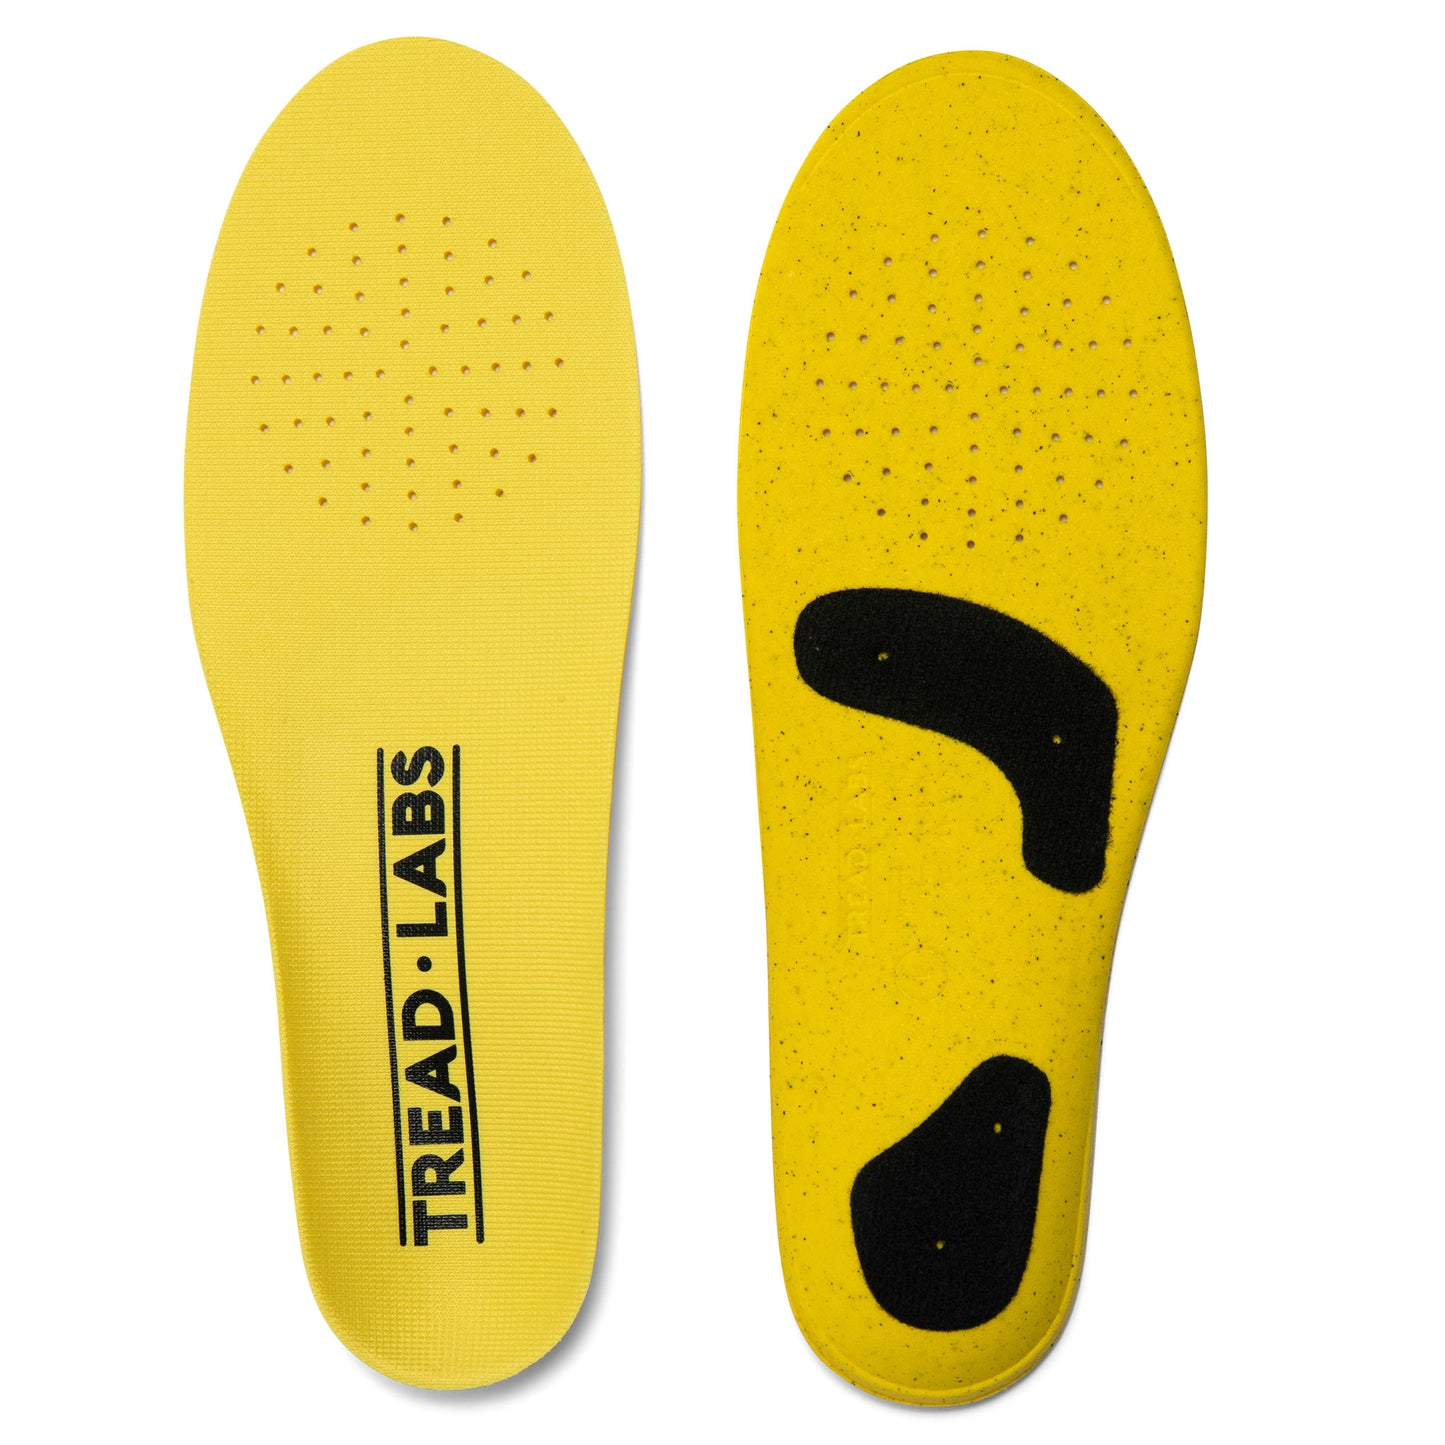 Dash Thin Insole Replacement Top Covers From Tread Labs